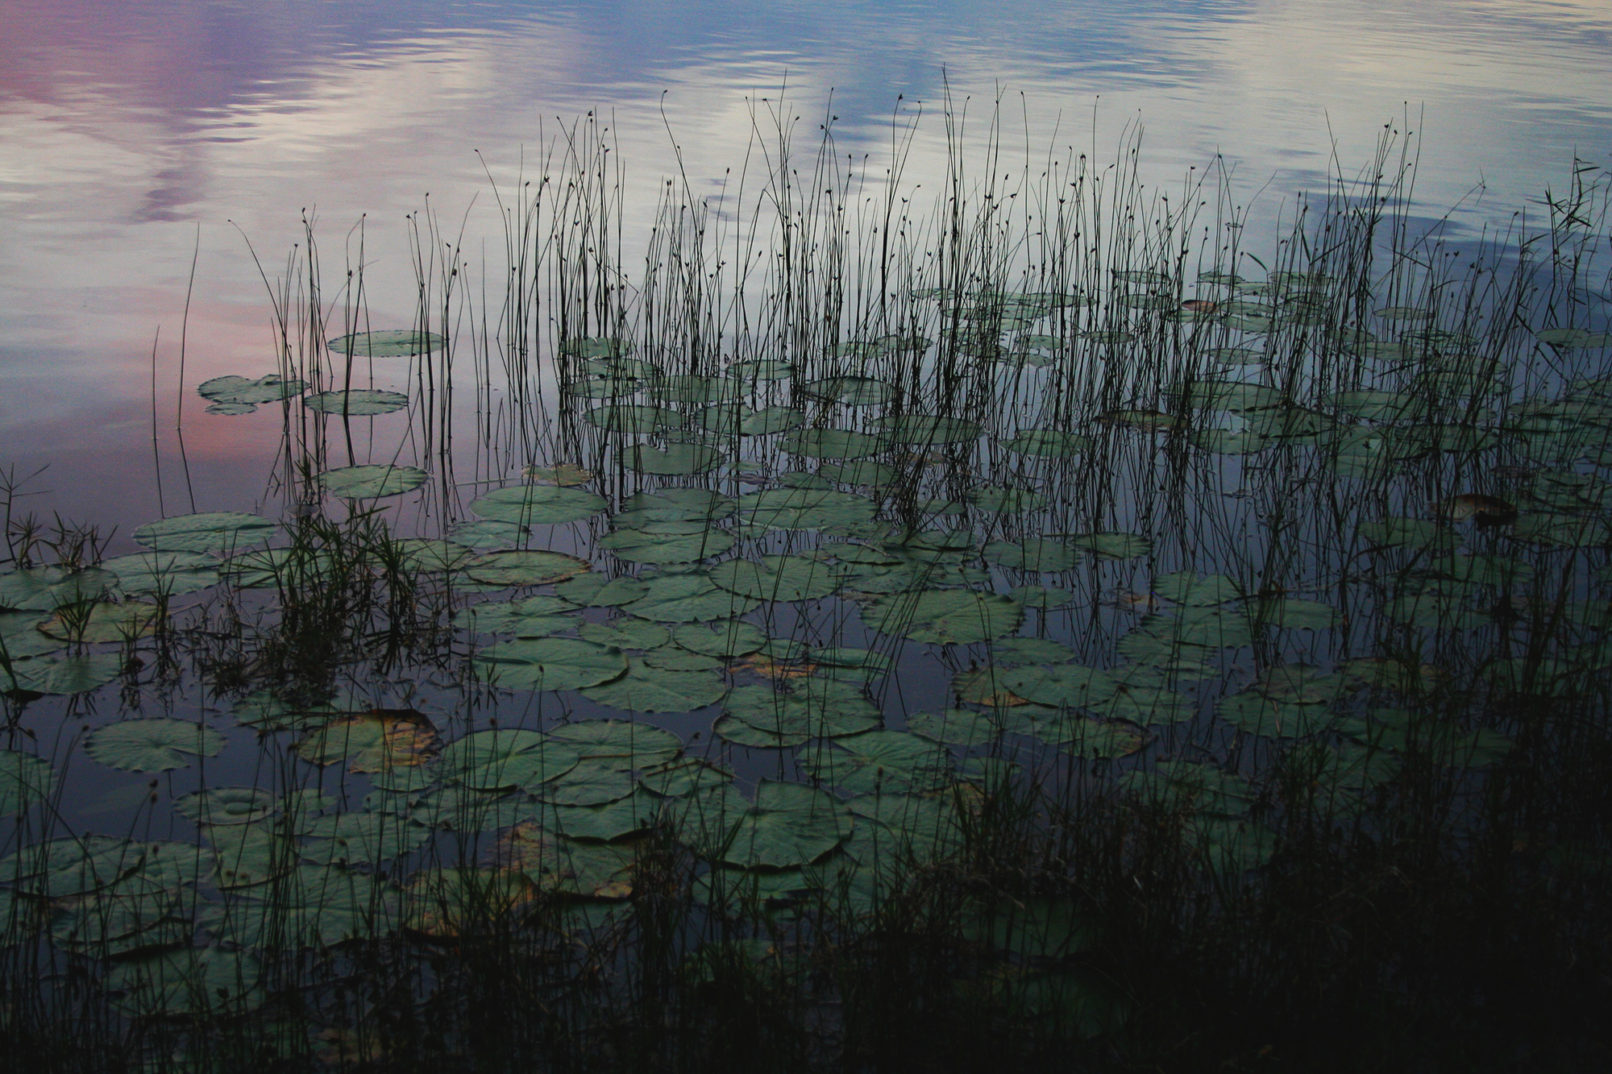 Lilly pads are surrounded by tranquil ripples and colors at dusk.